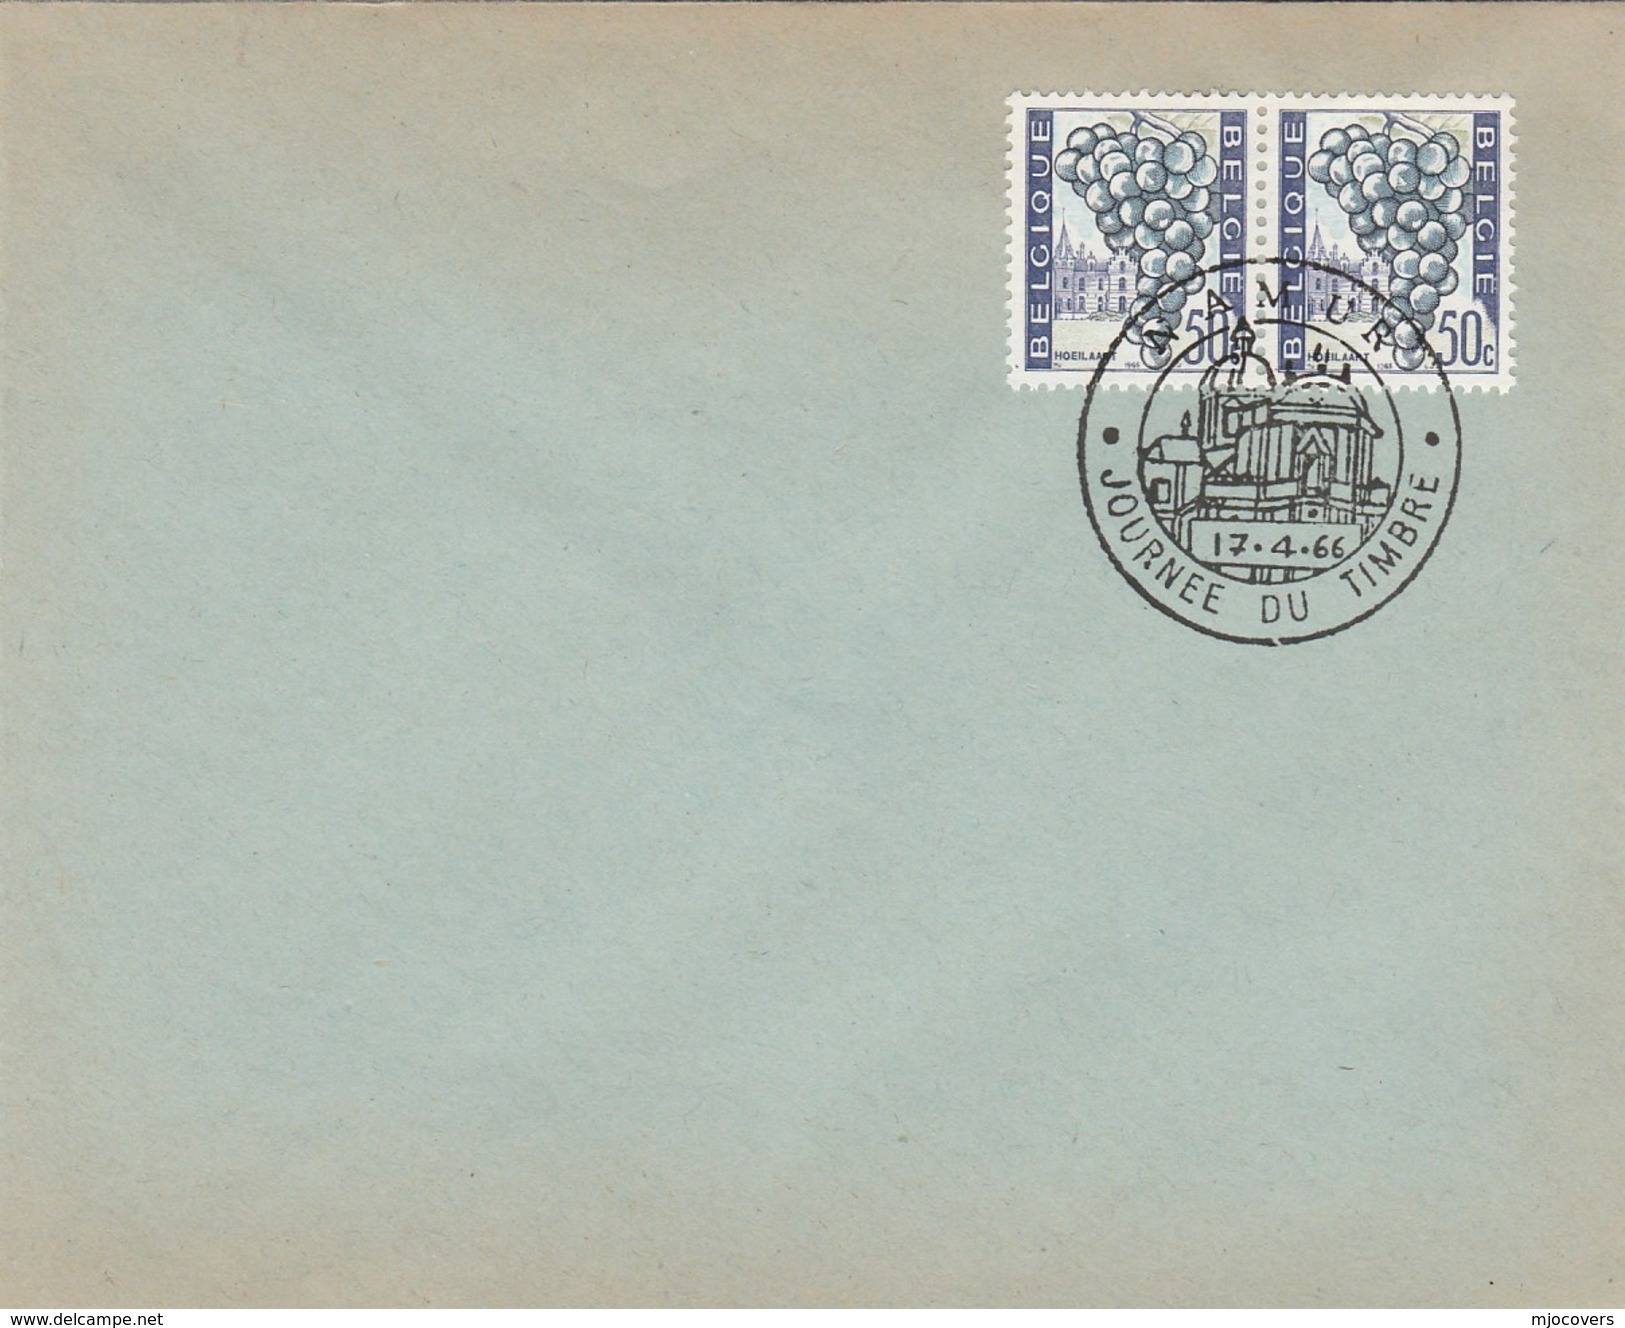 1966 NAMUR CATHEDRAL , STAMP DAY Event Cover BELGIUM,2x 50c Grapes Stamps Fruit Church Religion Christianity - Churches & Cathedrals